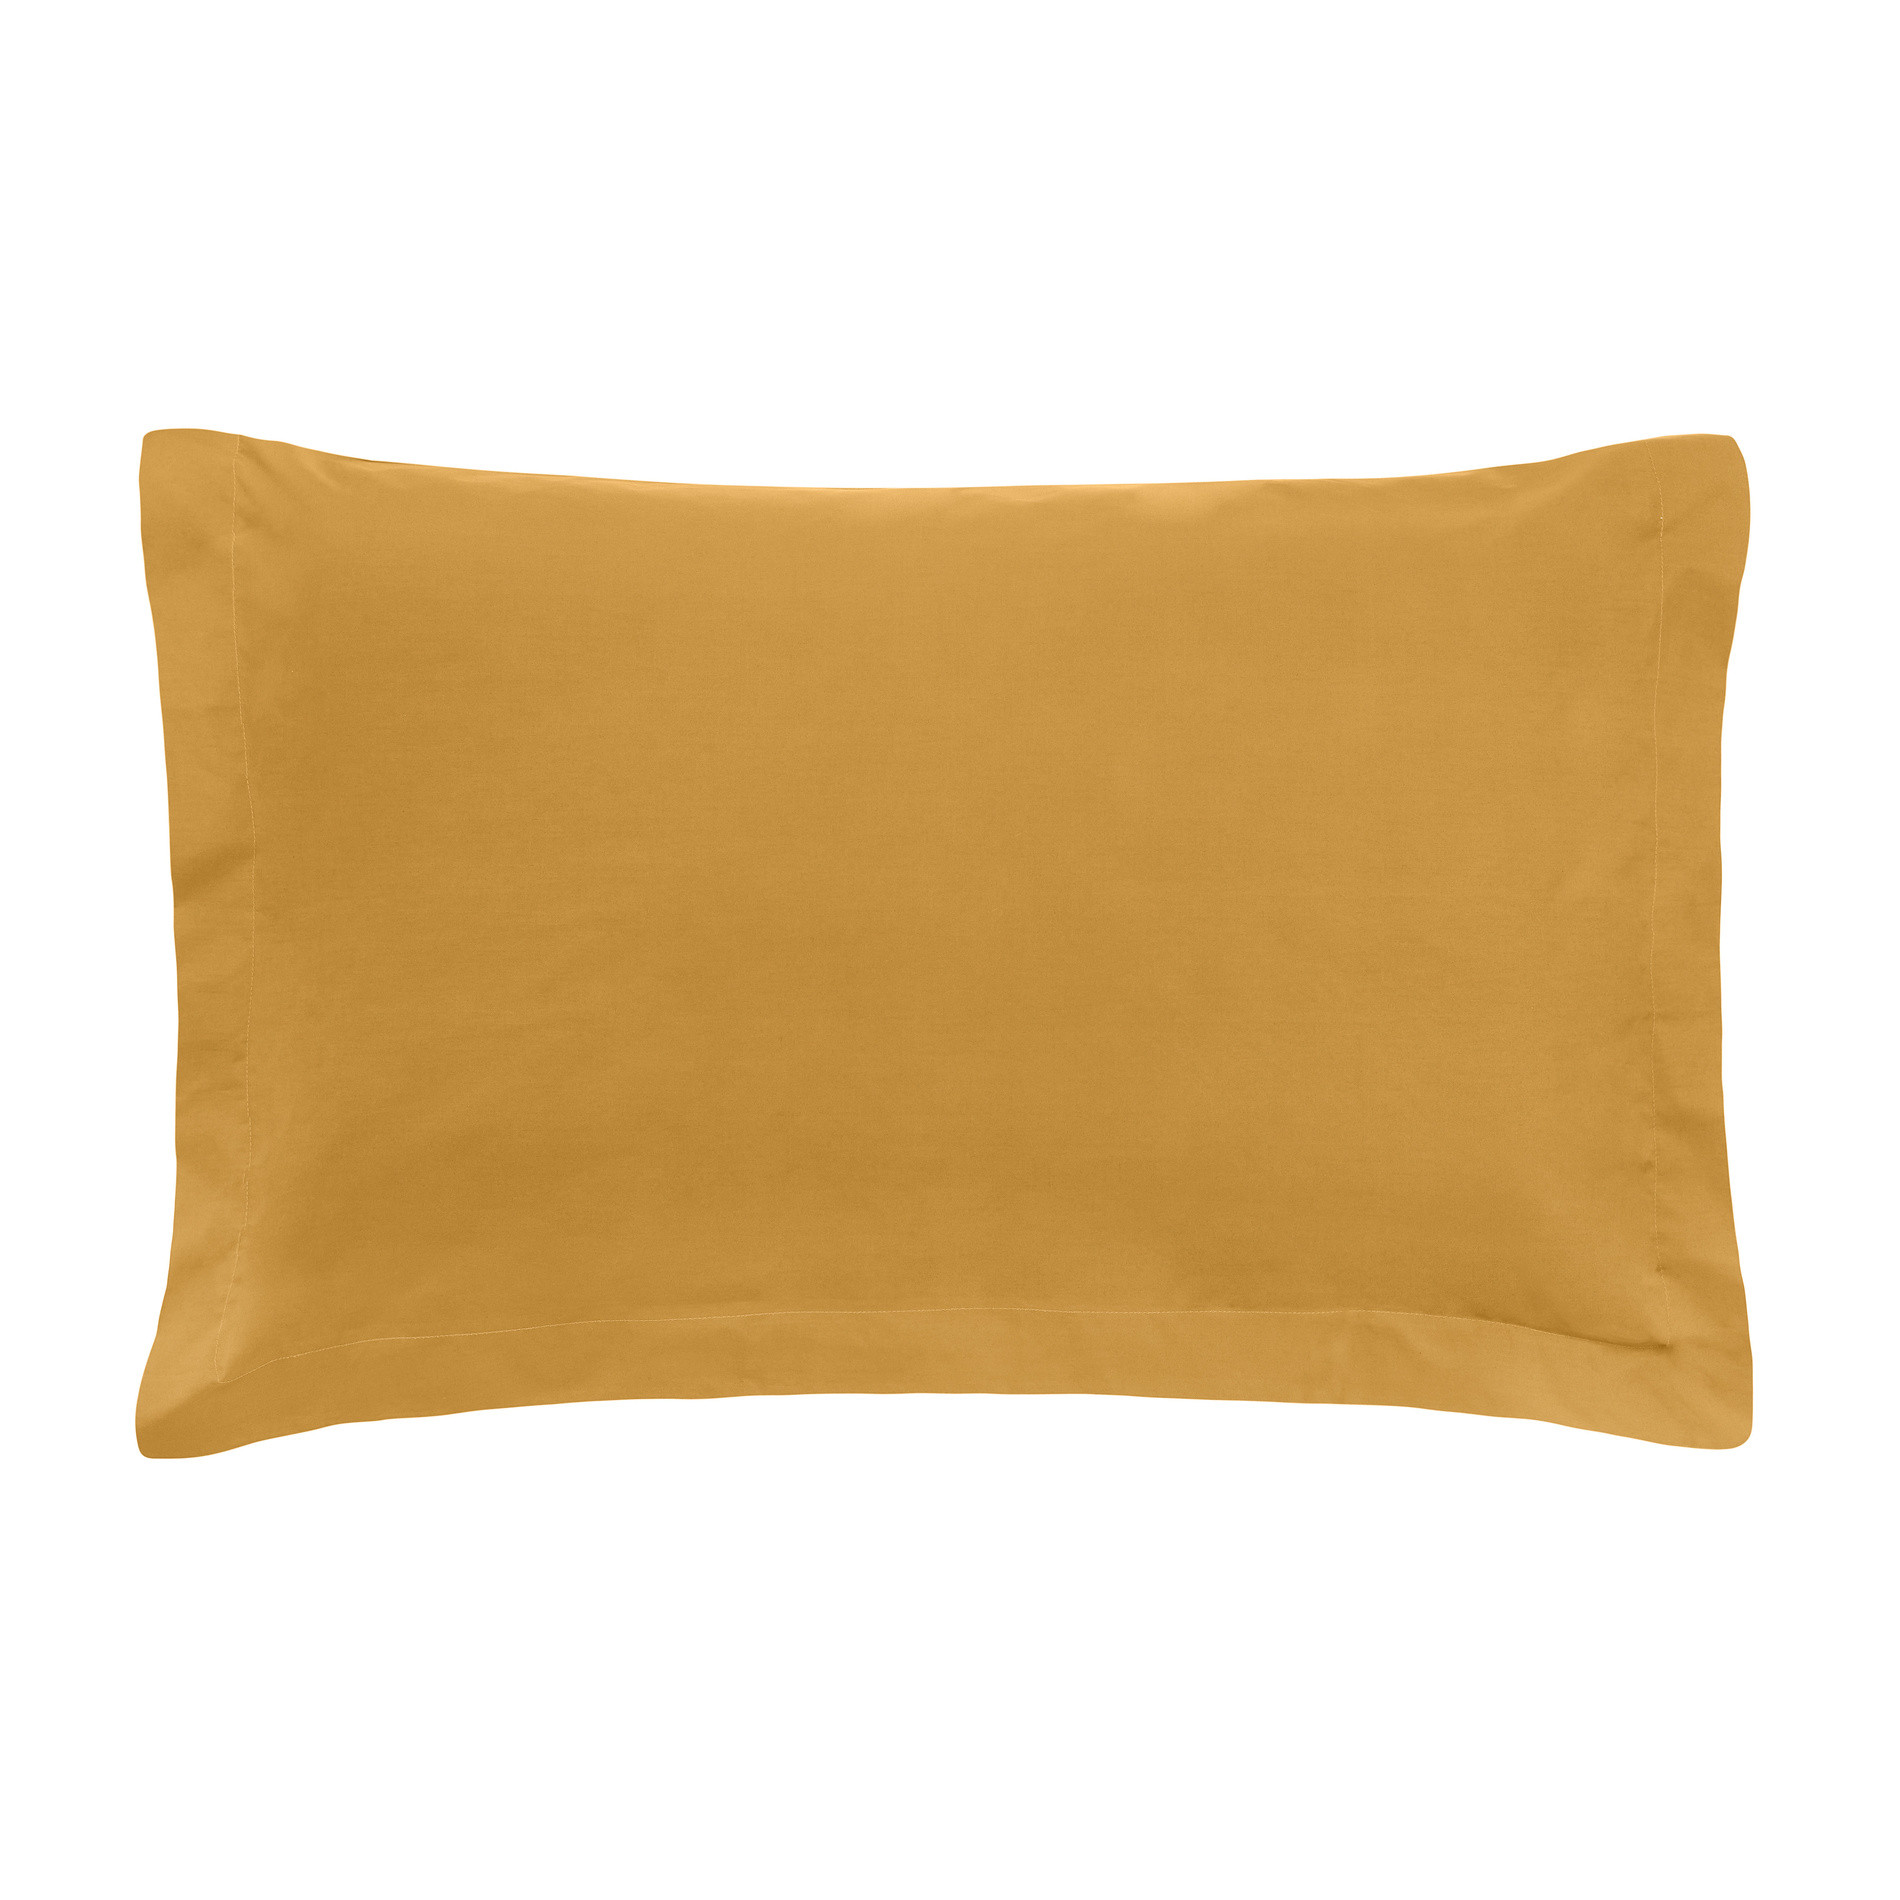 Zefiro solid colour pillowcase in percale., Ocra Yellow, large image number 0